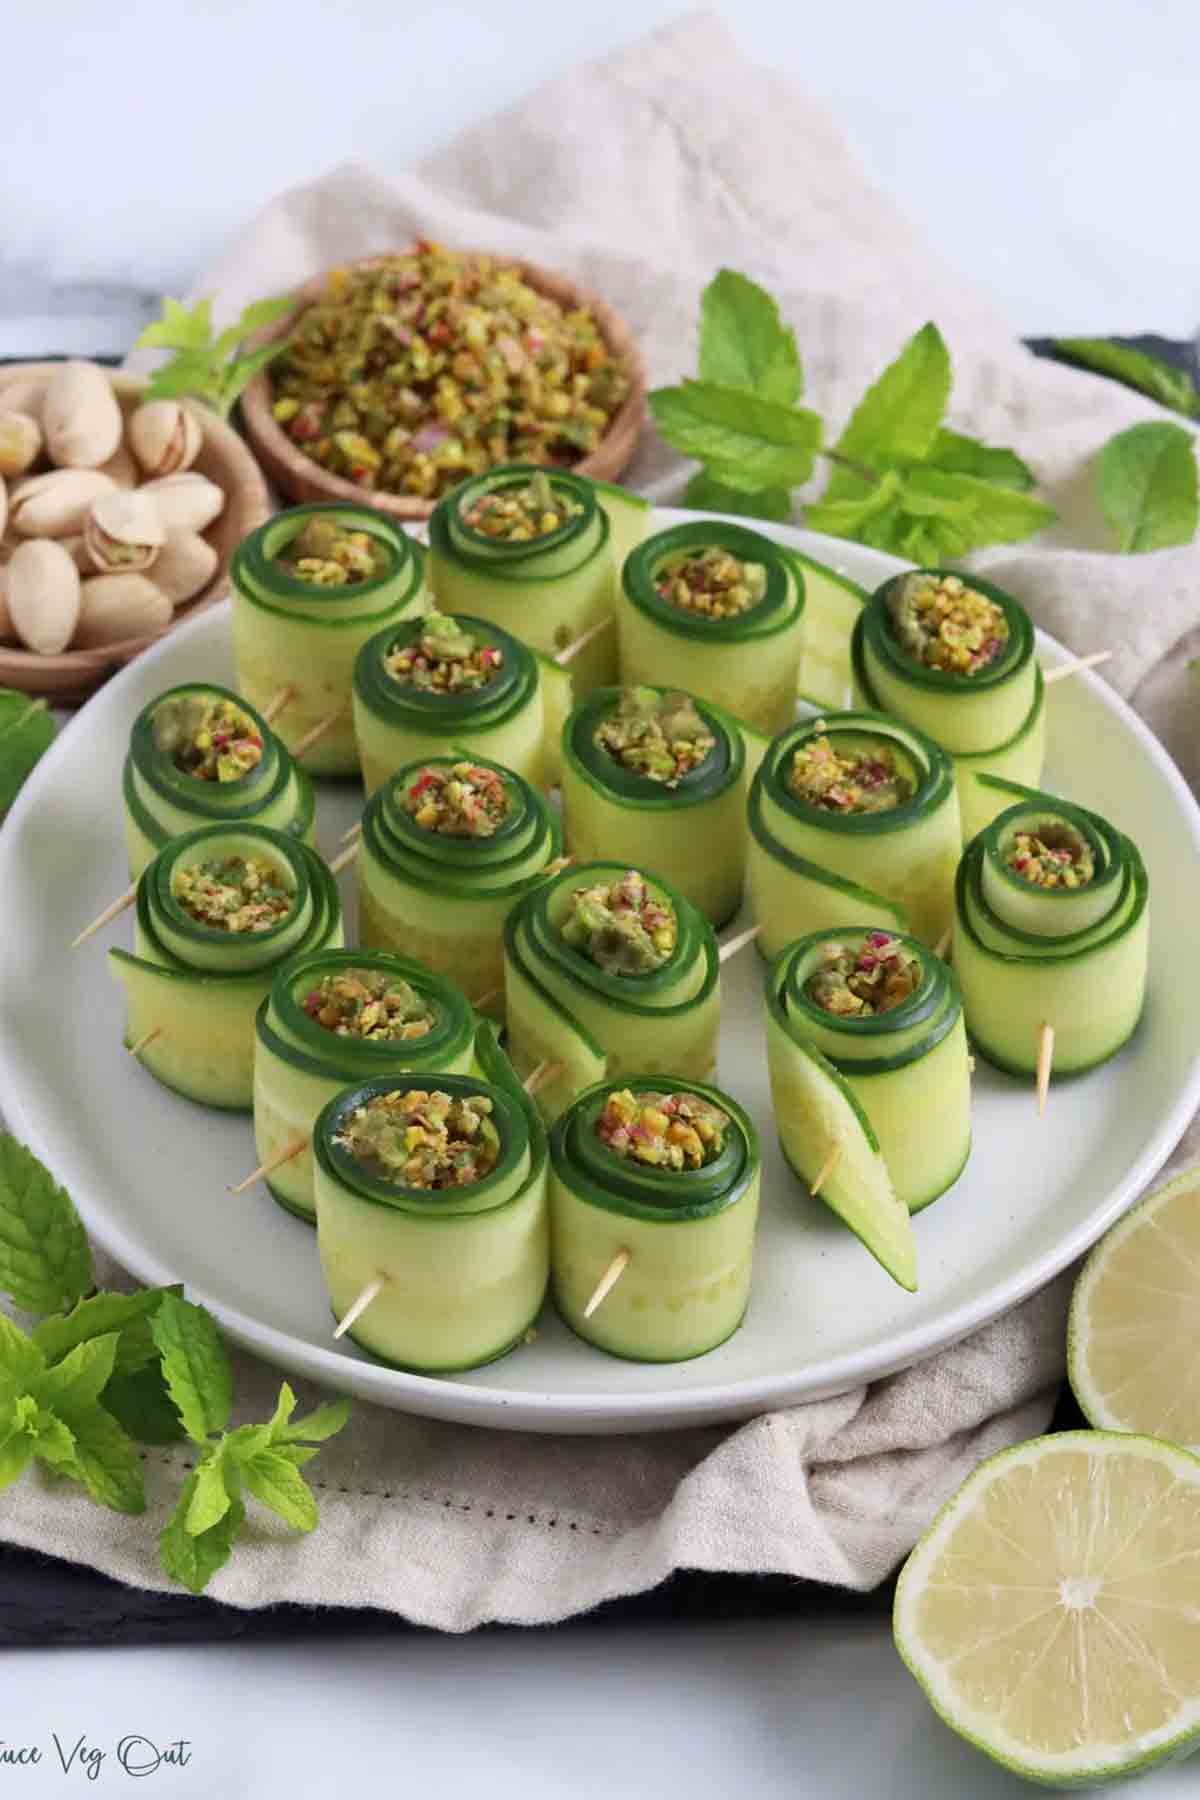 Cucumber Roll Up With Pistachio